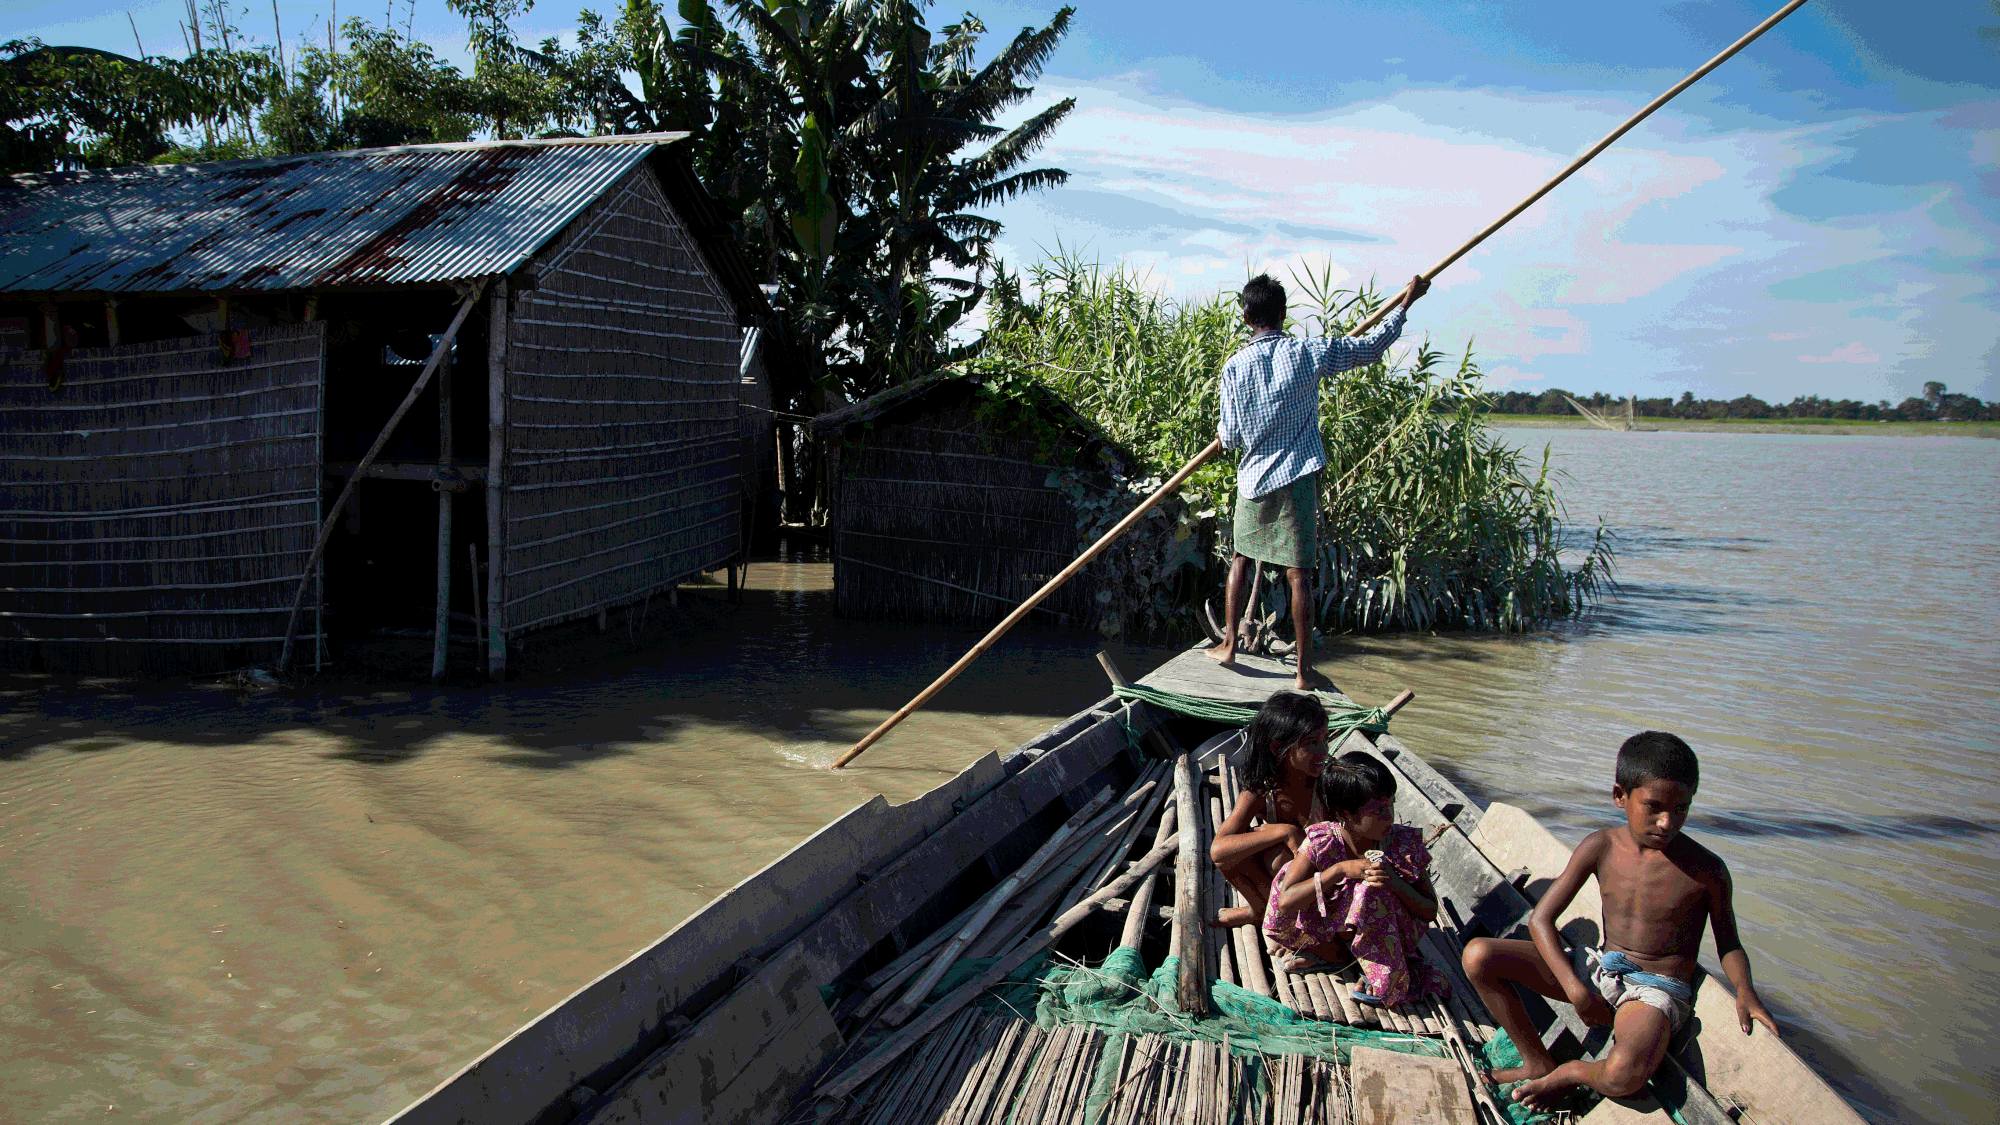 Flood affected villagers move on a boat in Morigaon district, east of Gauhati, Assam, July 2016. (Photo: AP)